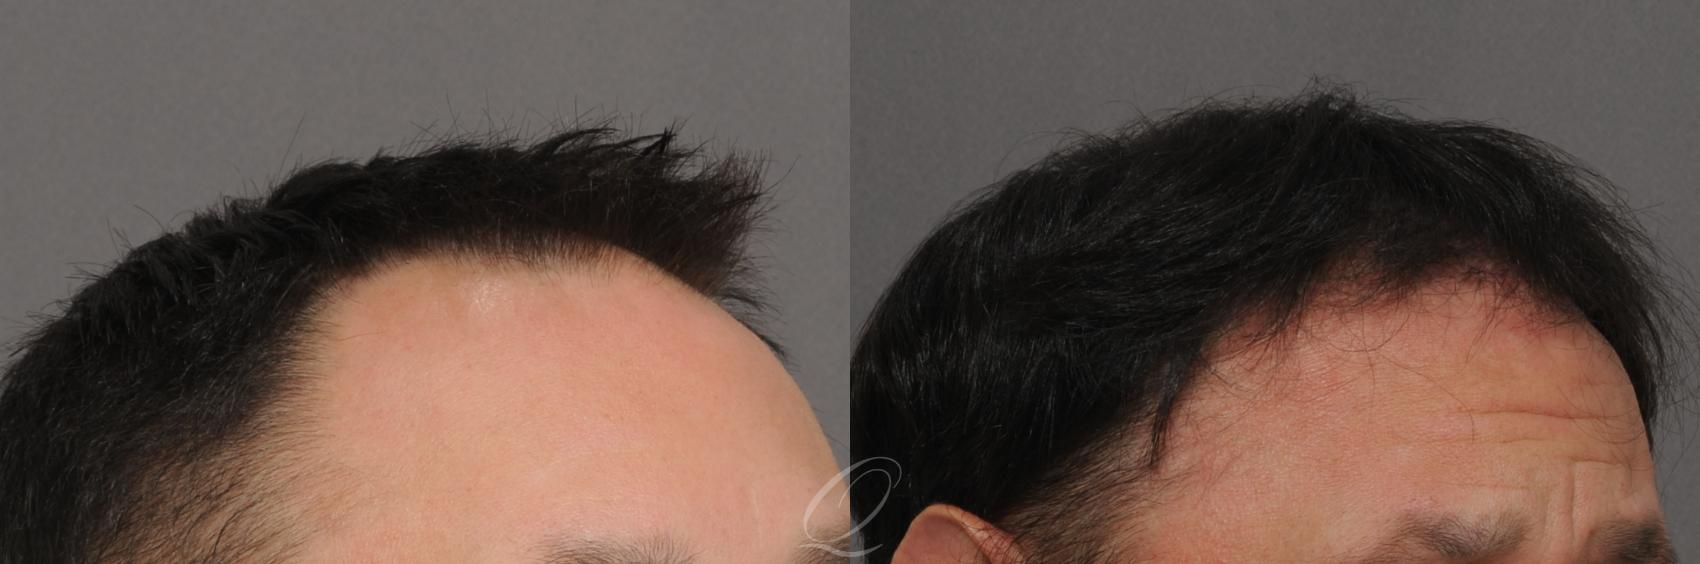 FUT Case 1017 Before & After View #3 | Rochester, Buffalo, & Syracuse, NY | Quatela Center for Hair Restoration